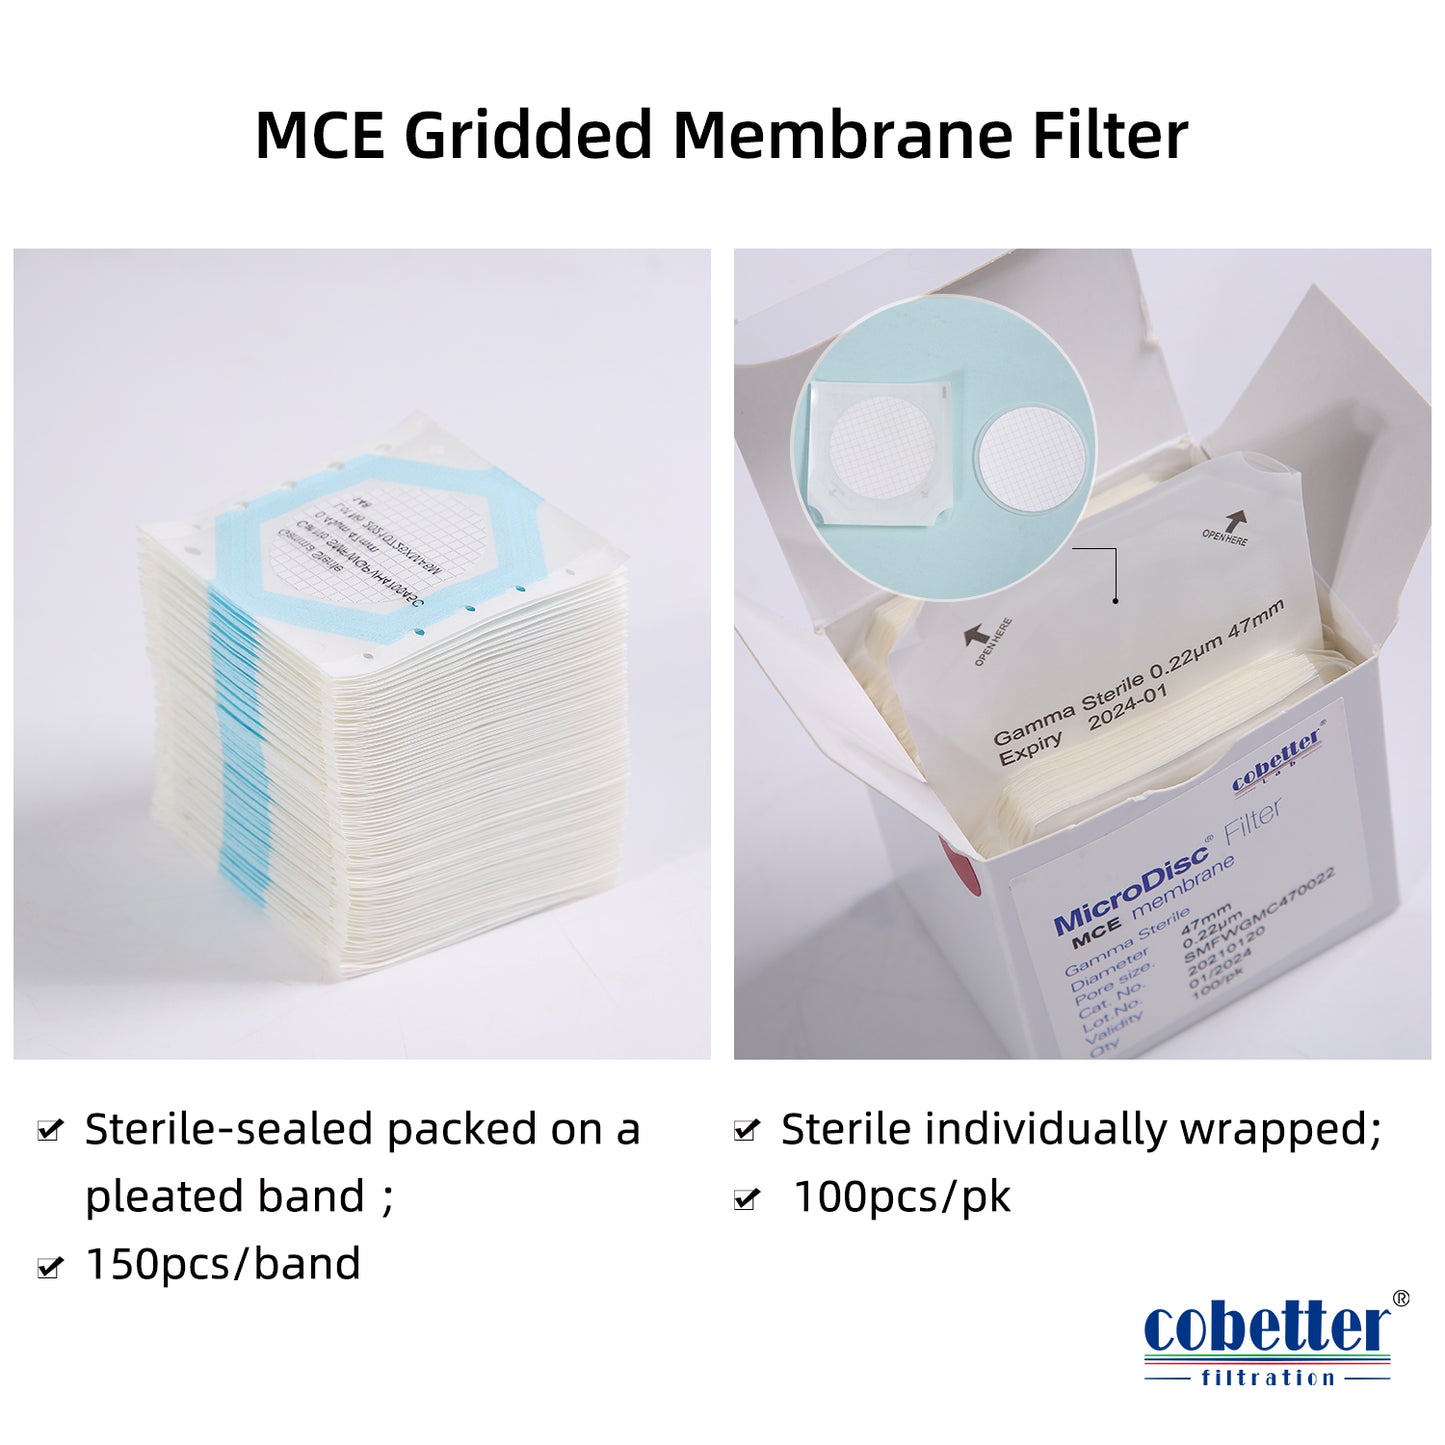 COBETTER MCE Membrane Filter, White with Grid, Packaged on a pleated band